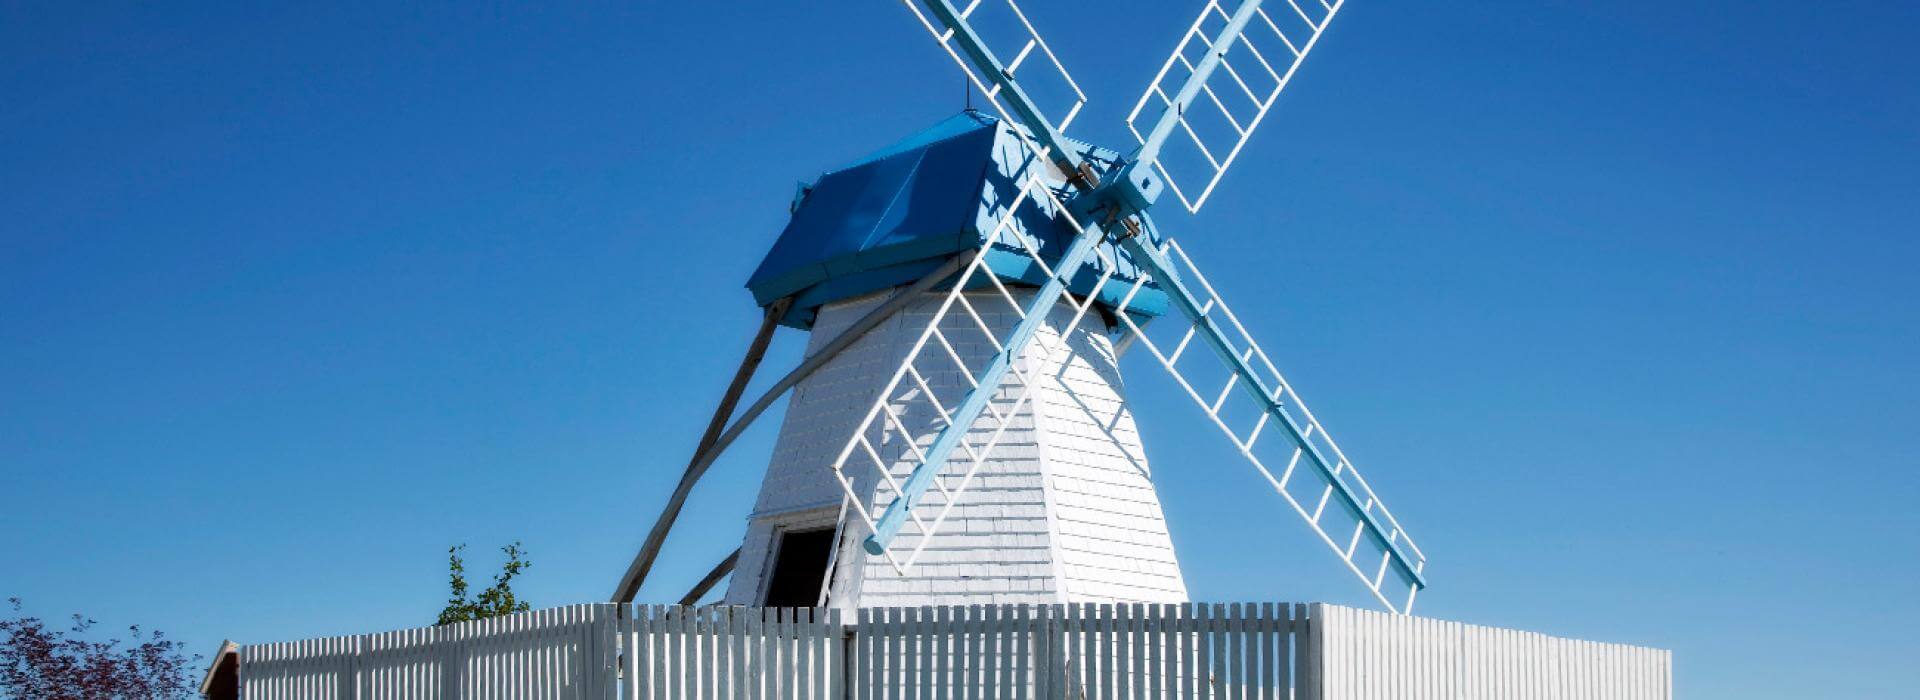 White and blue windmill with clear sky in background